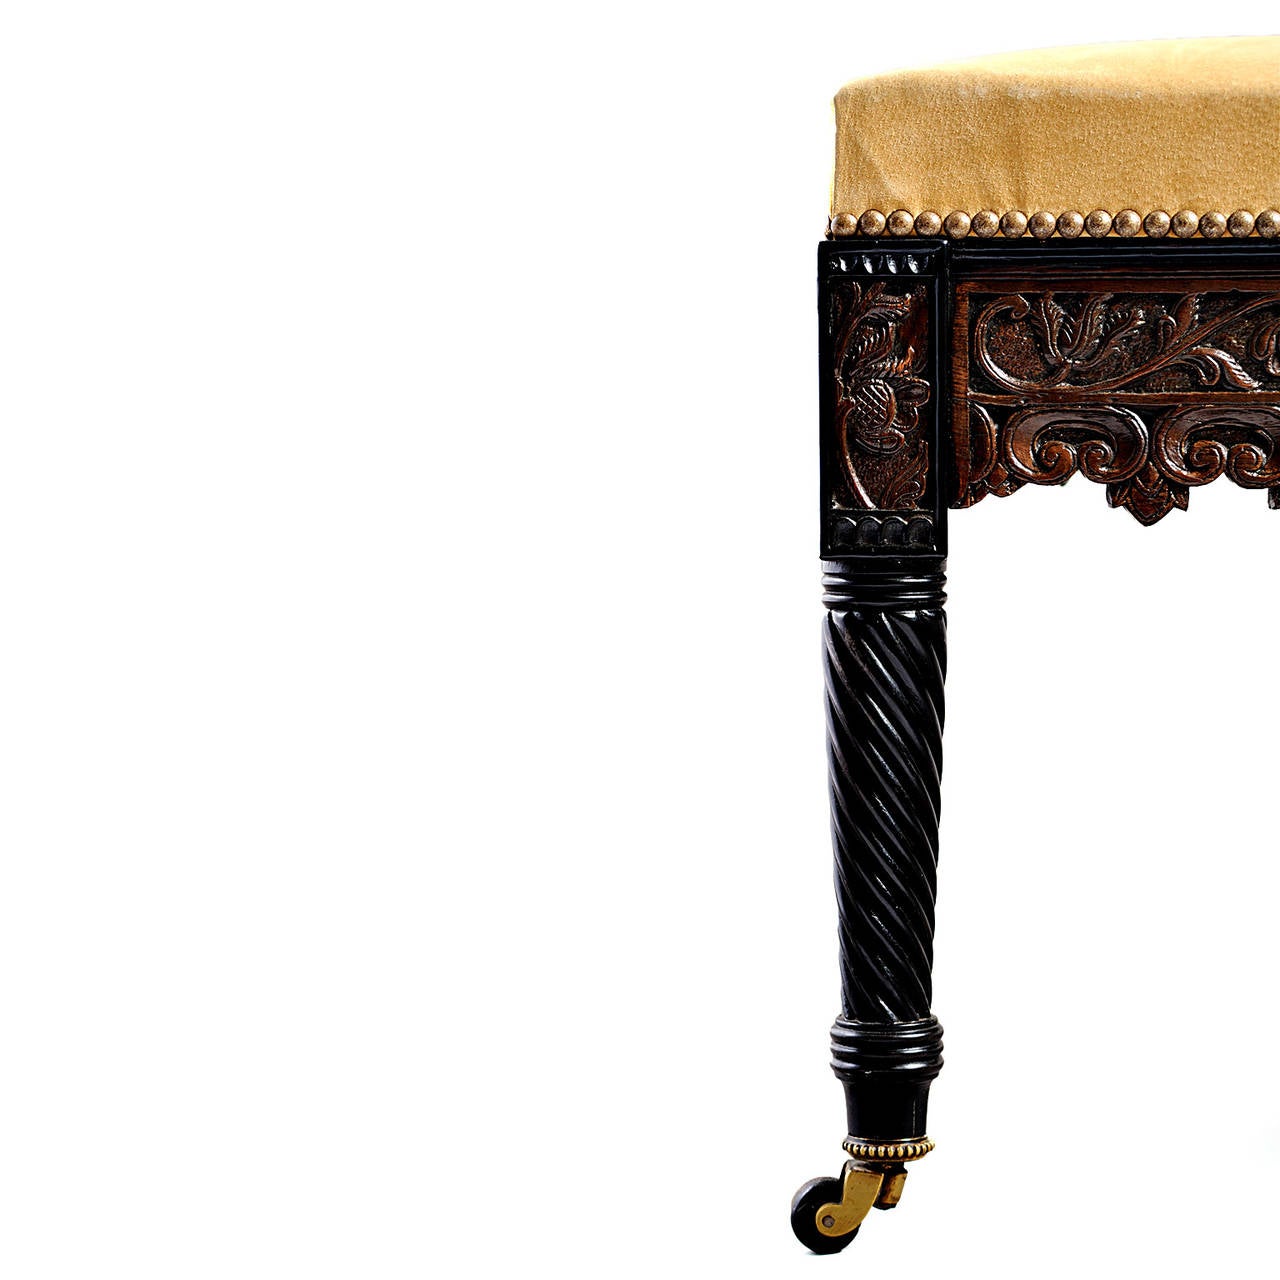 English Regency Carved Ebony and Anglo-Indian Hardwood Stool in Antiquarian Taste For Sale